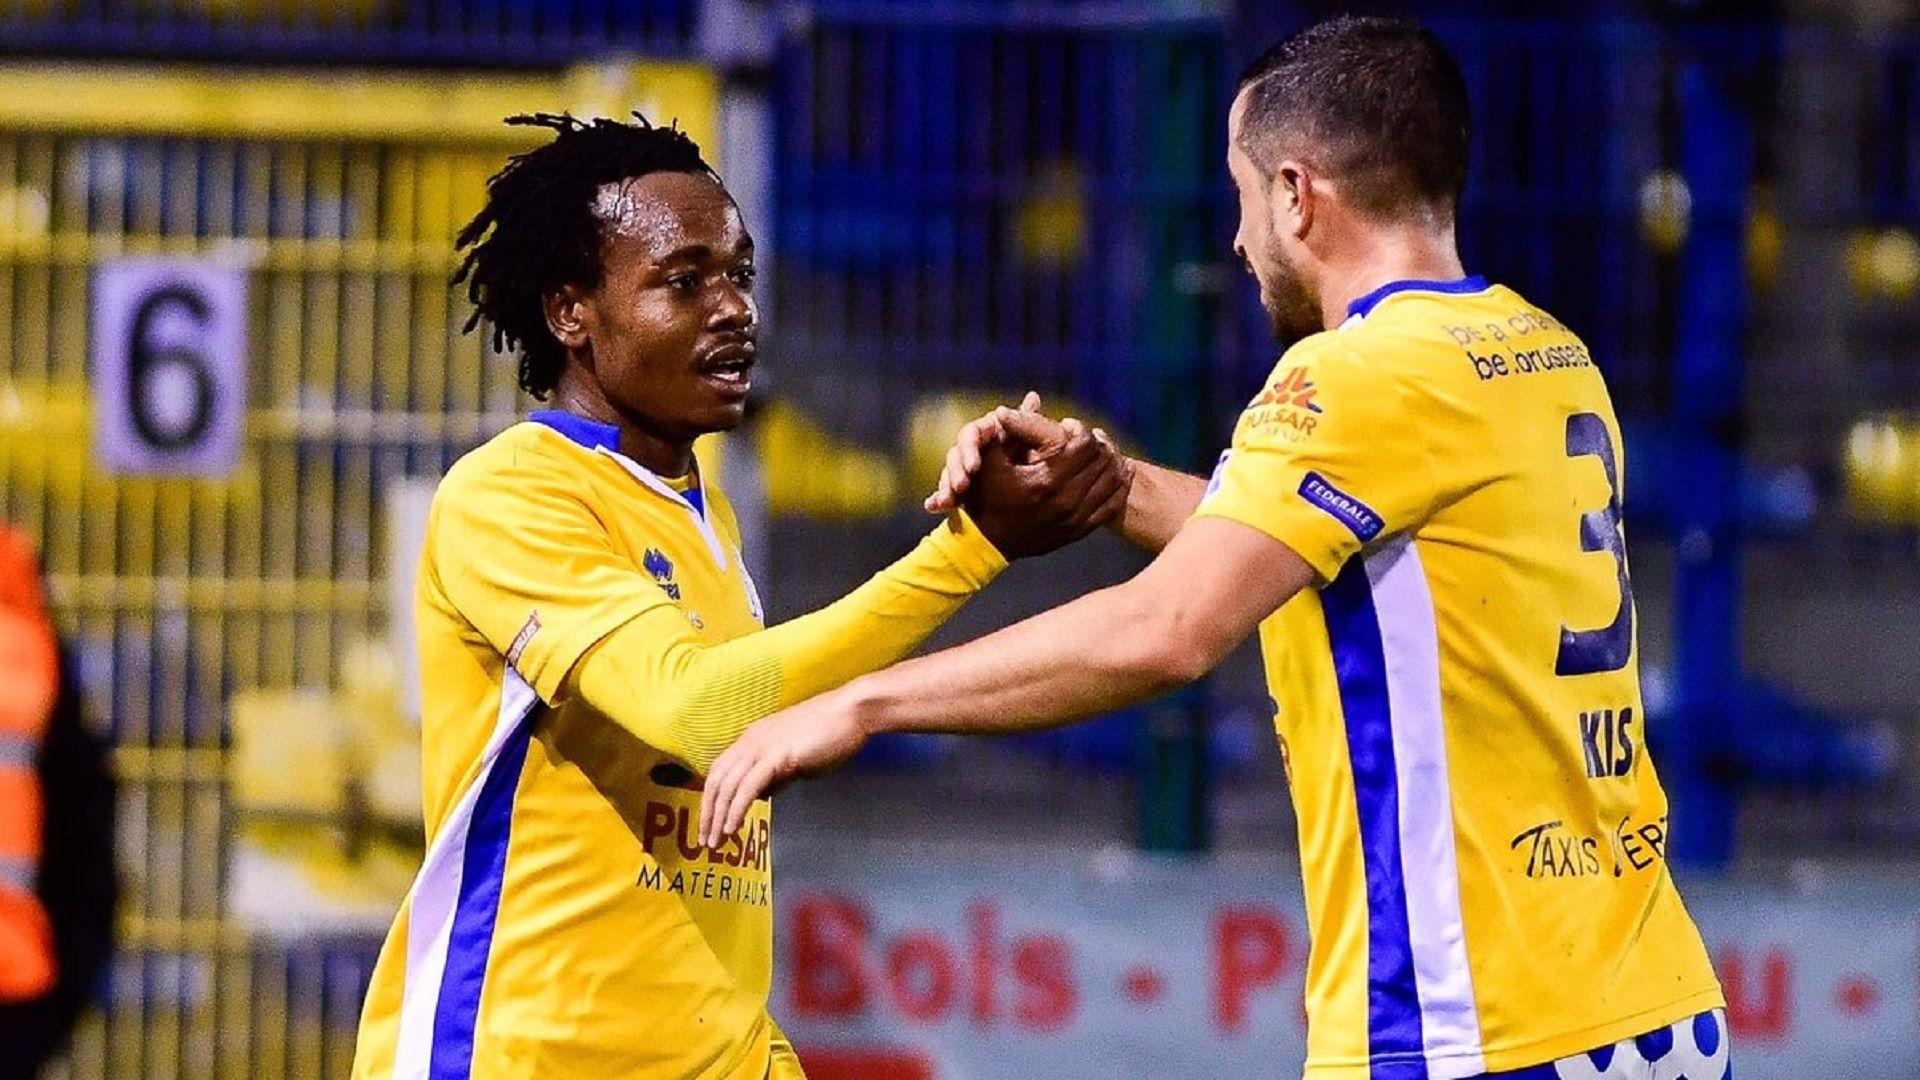 Percy Tau Wallpapers - Wallpaper Cave